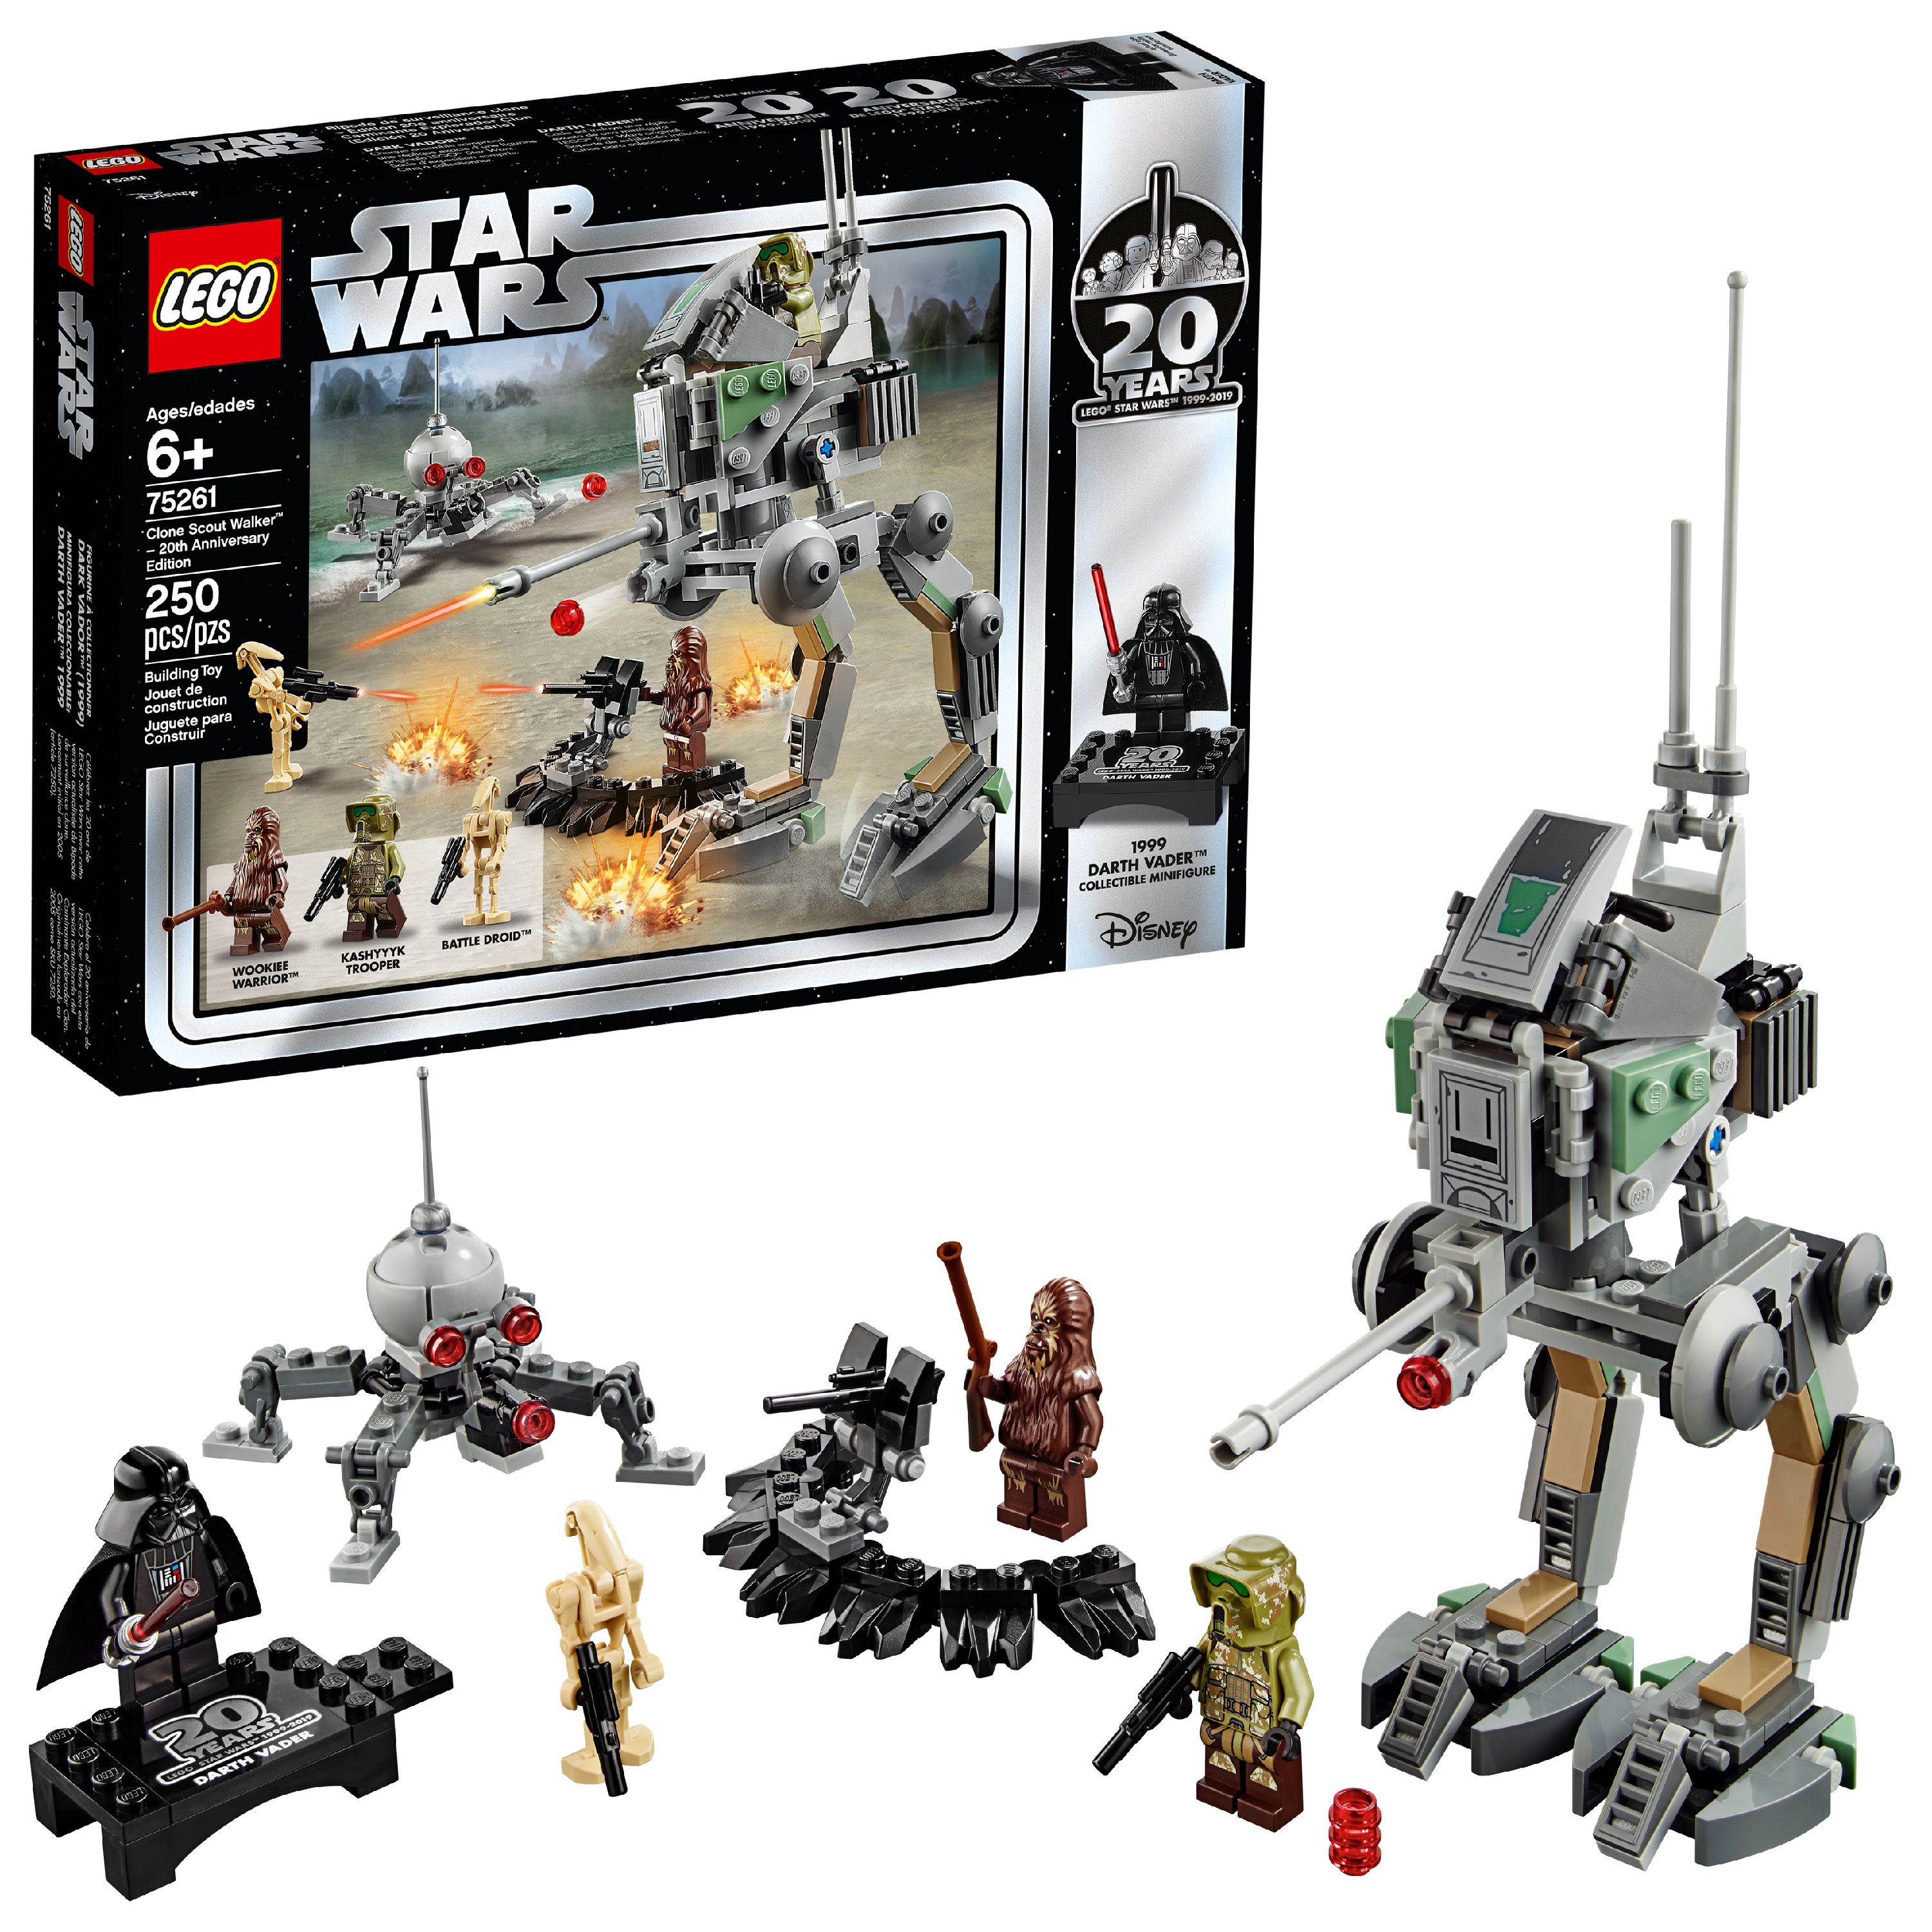 LEGO Star Wars 20th Anniversary Edition Clone Scout Walker 75261 Building Set - image 1 of 7